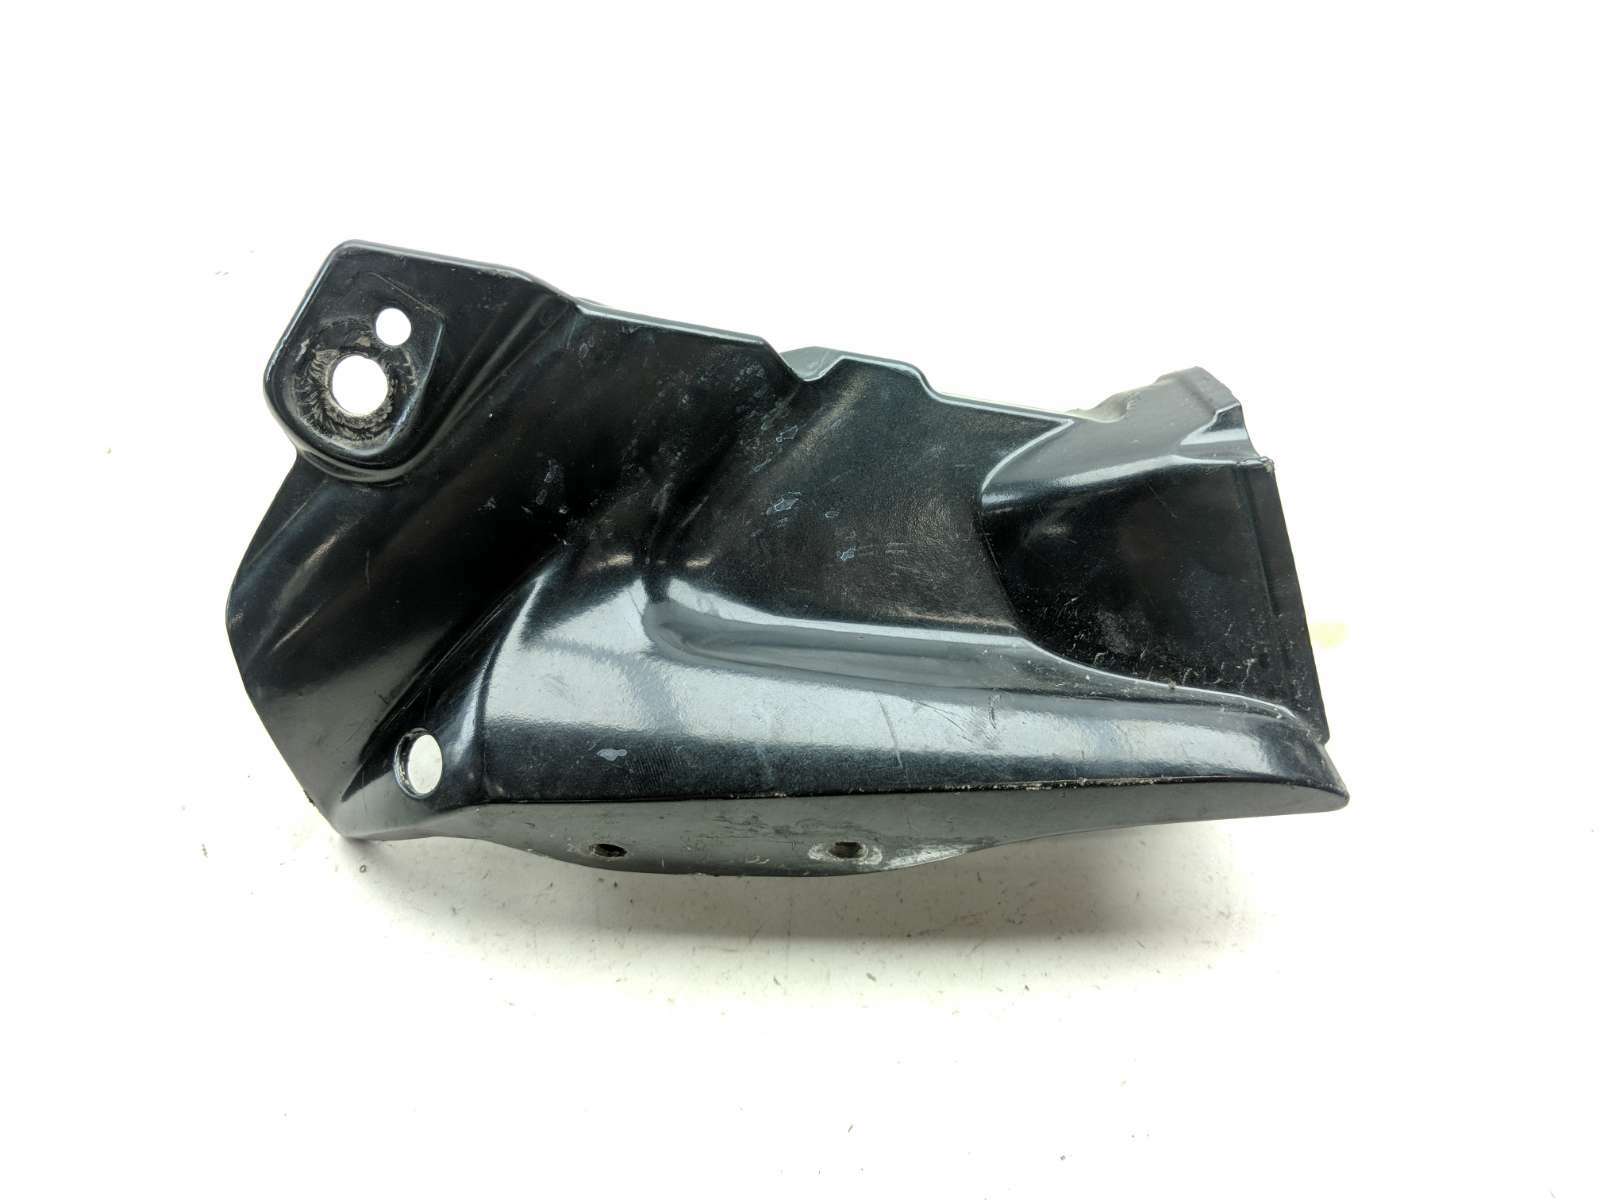 04 Buell Lightning XB12 Front Right Module Side Casting Cover M0643.1AD